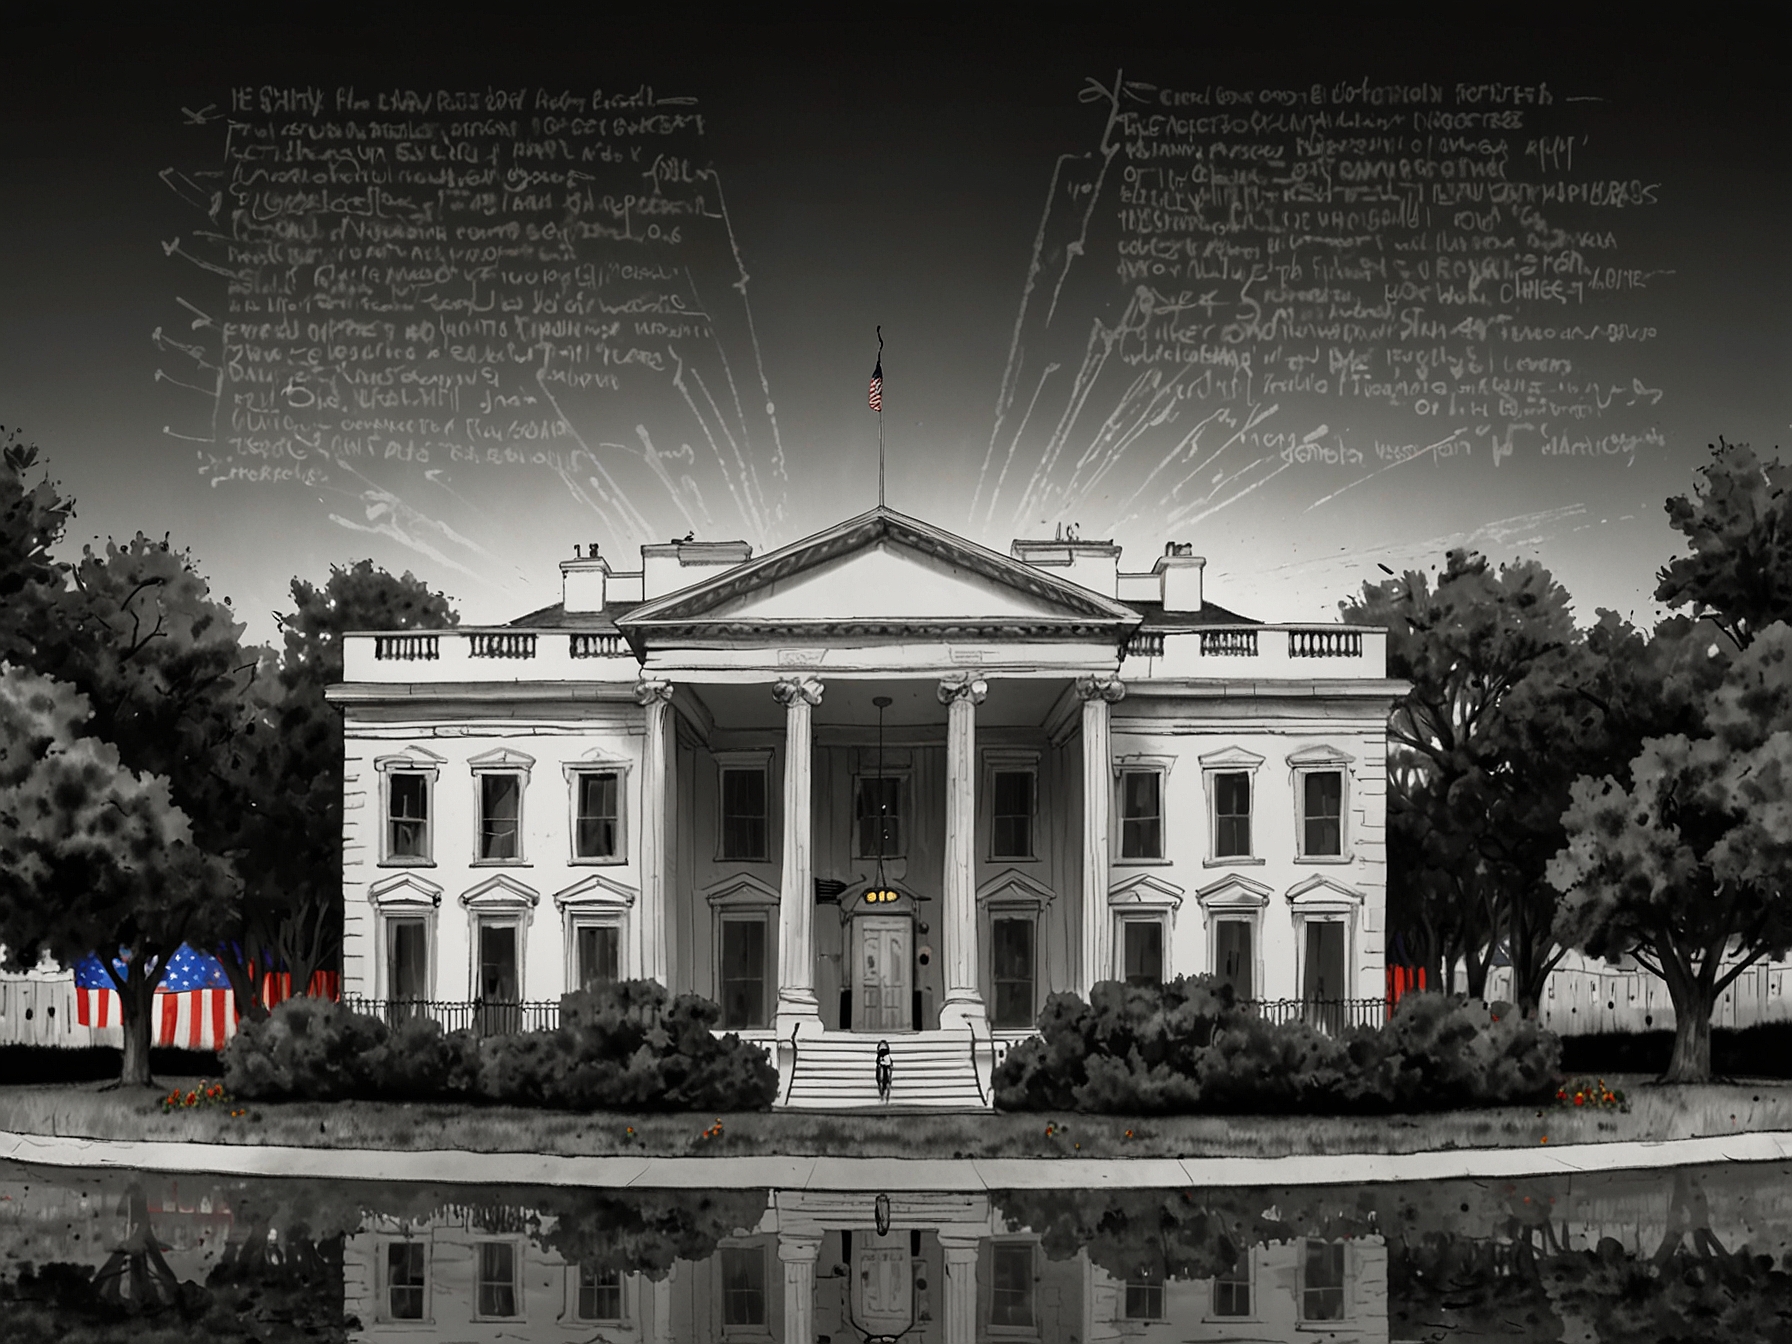 Illustration of the White House with an overlay of a social media interface highlighting controversial anti-Israel tweets, emphasizing the clash between public officials and online statements.